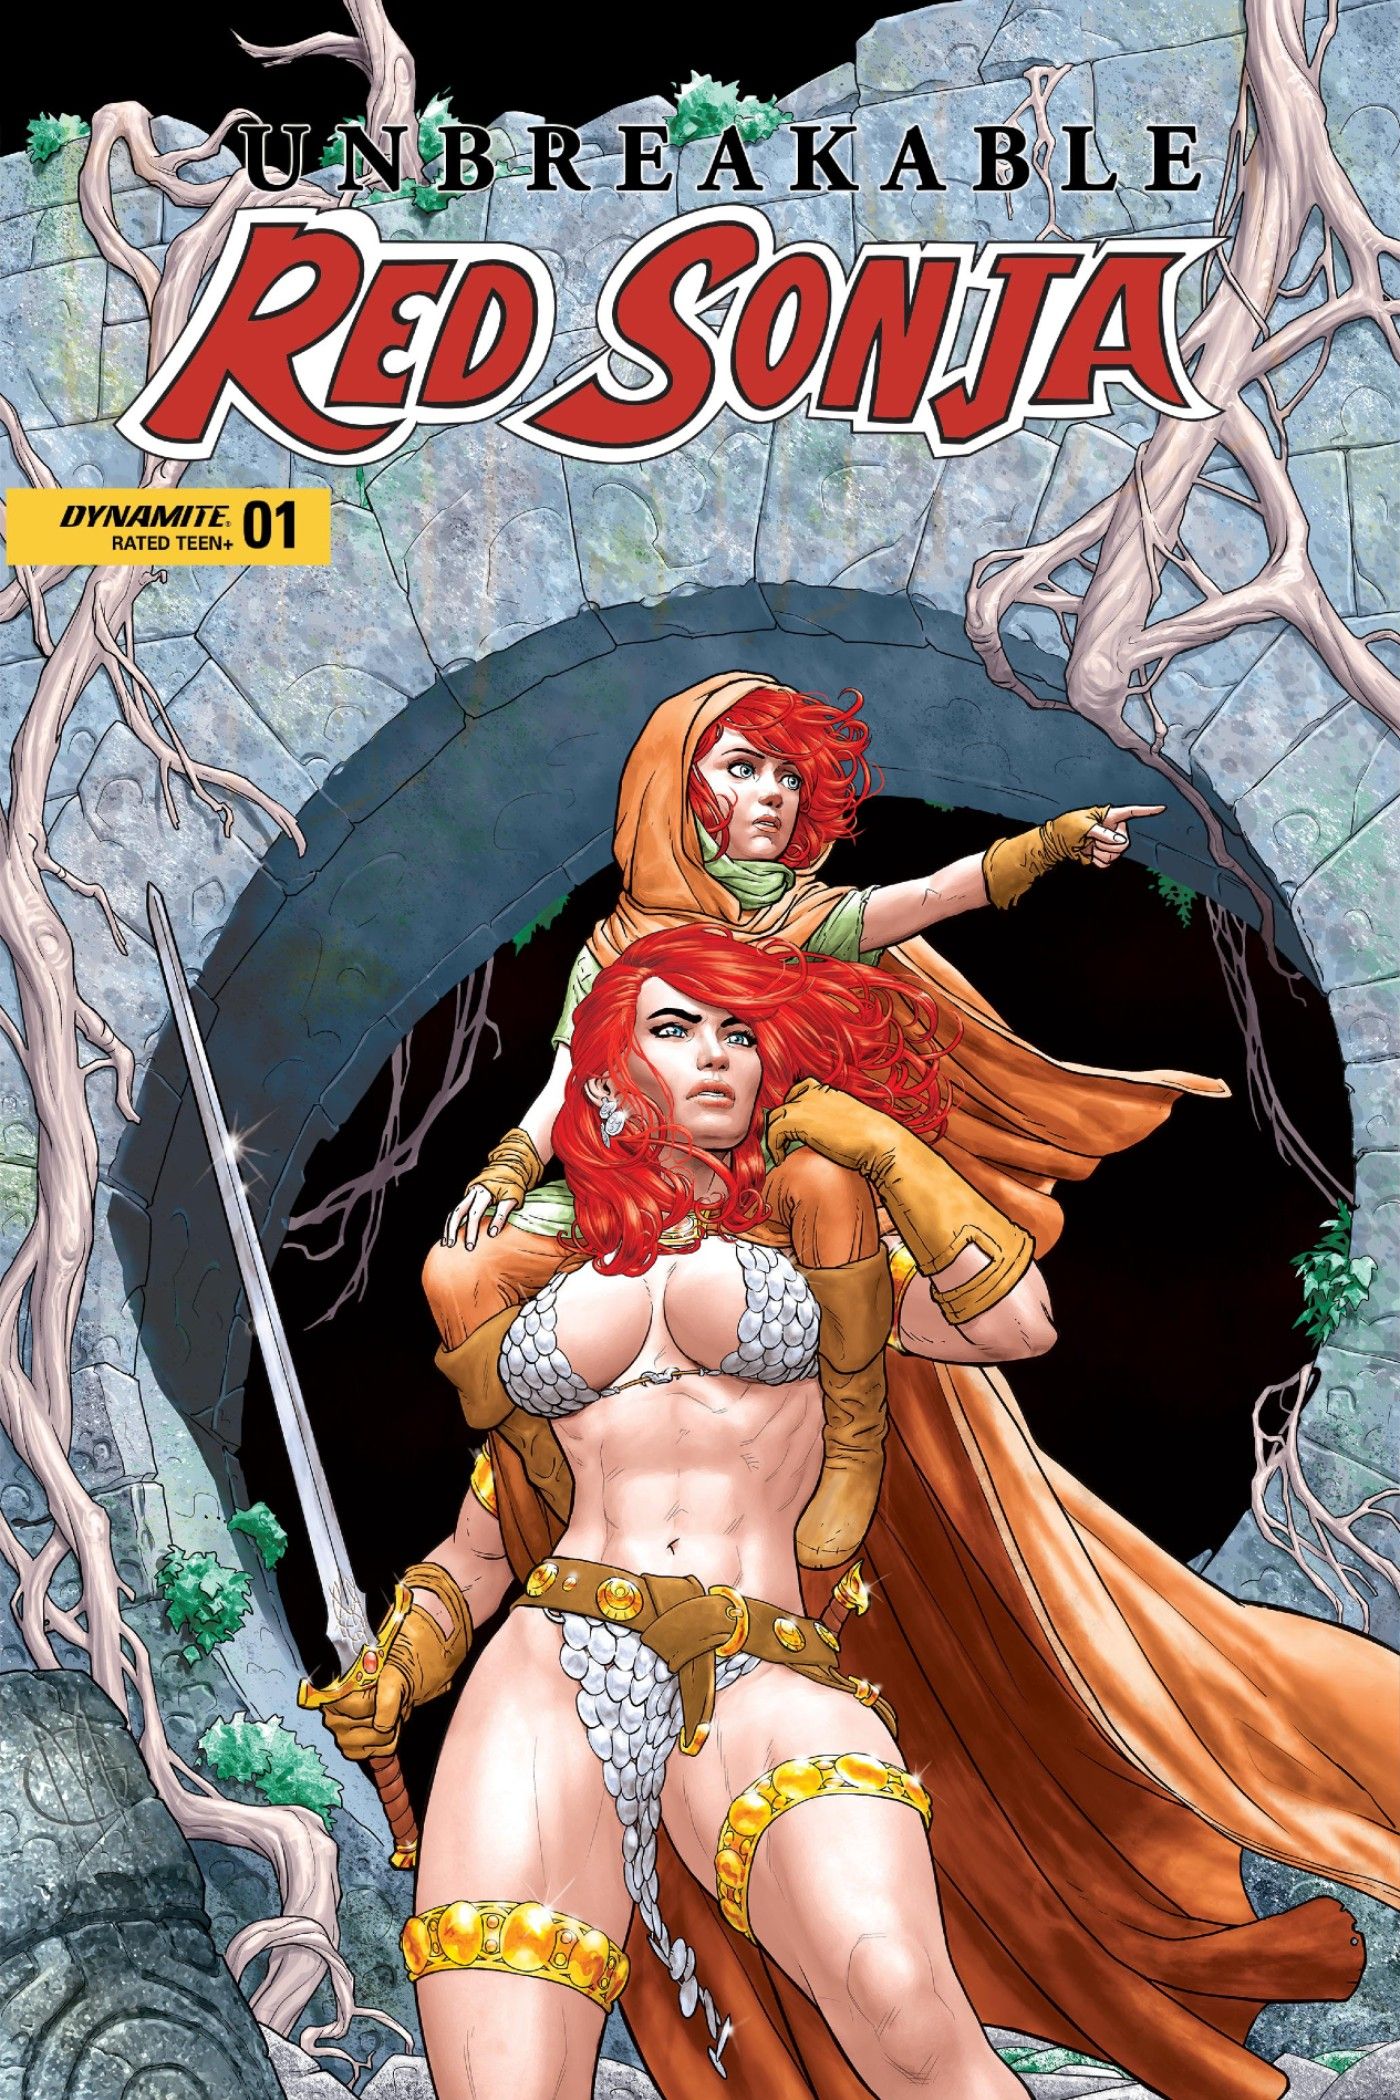 Unbreakable Red Sonja by Dynamite Comics